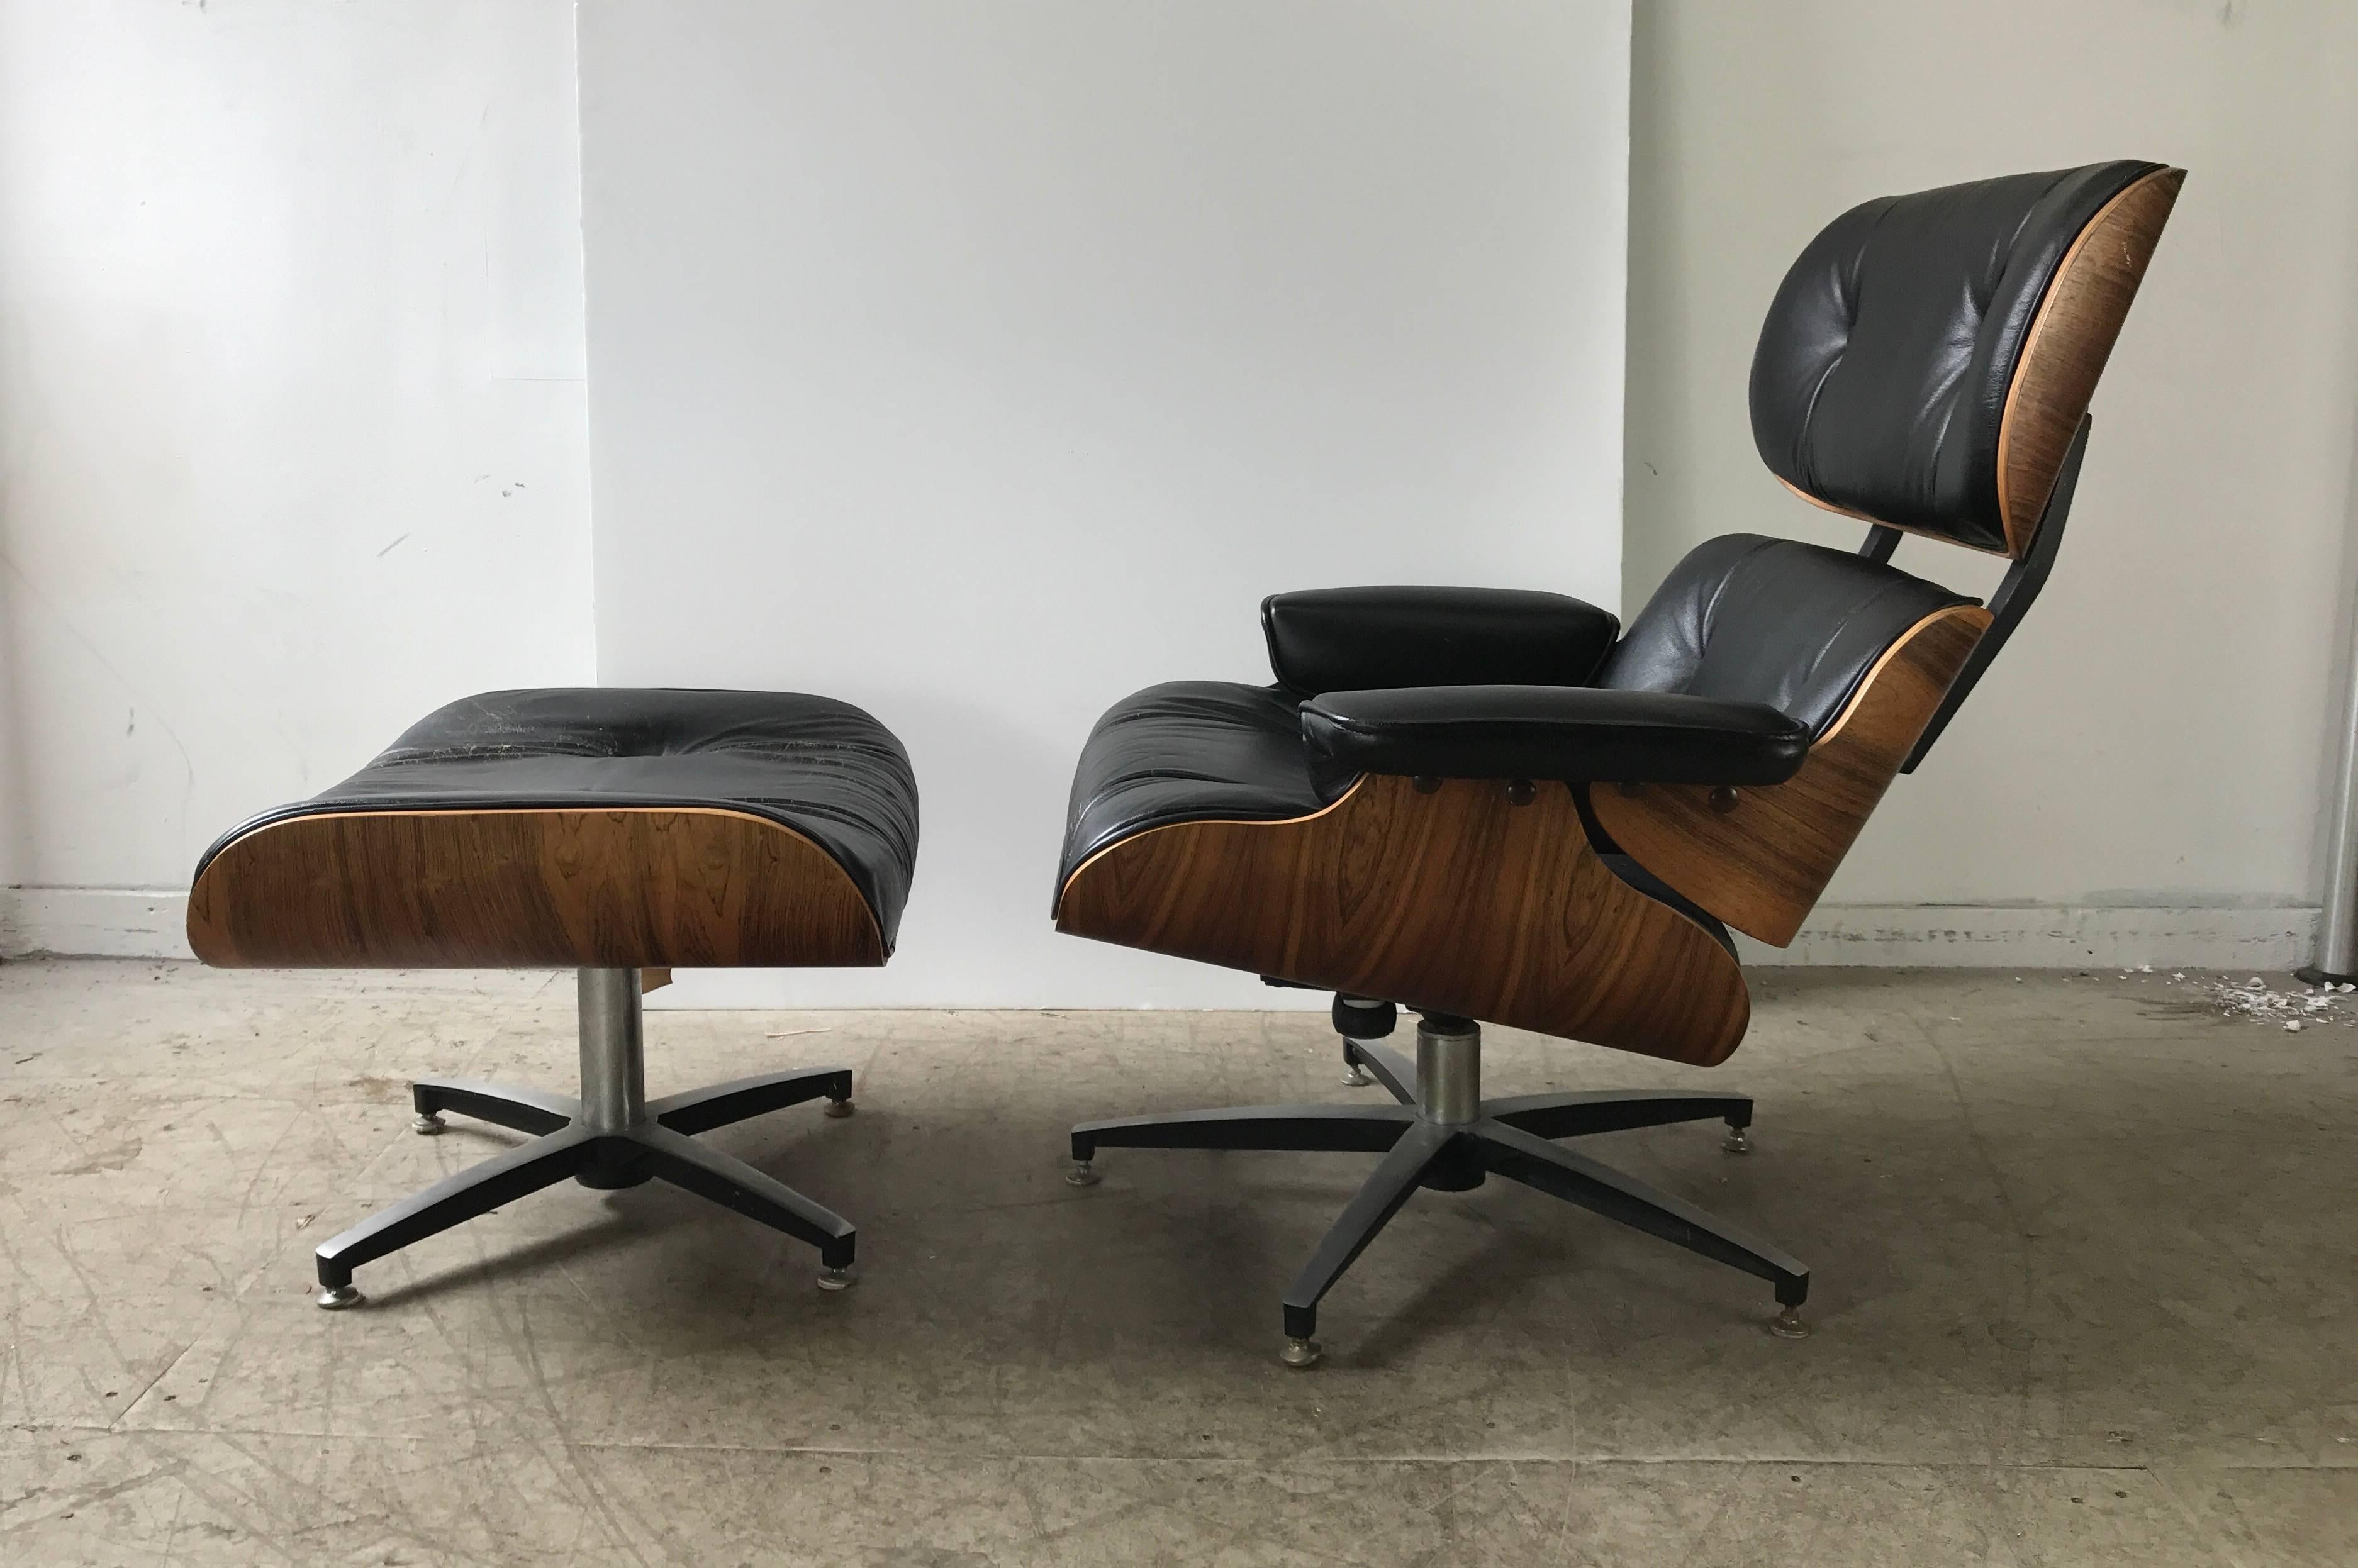 Modernist rosewood and leather Eames style 670 lounge chair and ottoman. Charlton Company's version said to be the closest reproduction to the Classic Herman Miller, Began production shortly after the original manufactured in 1956,Beautuful original